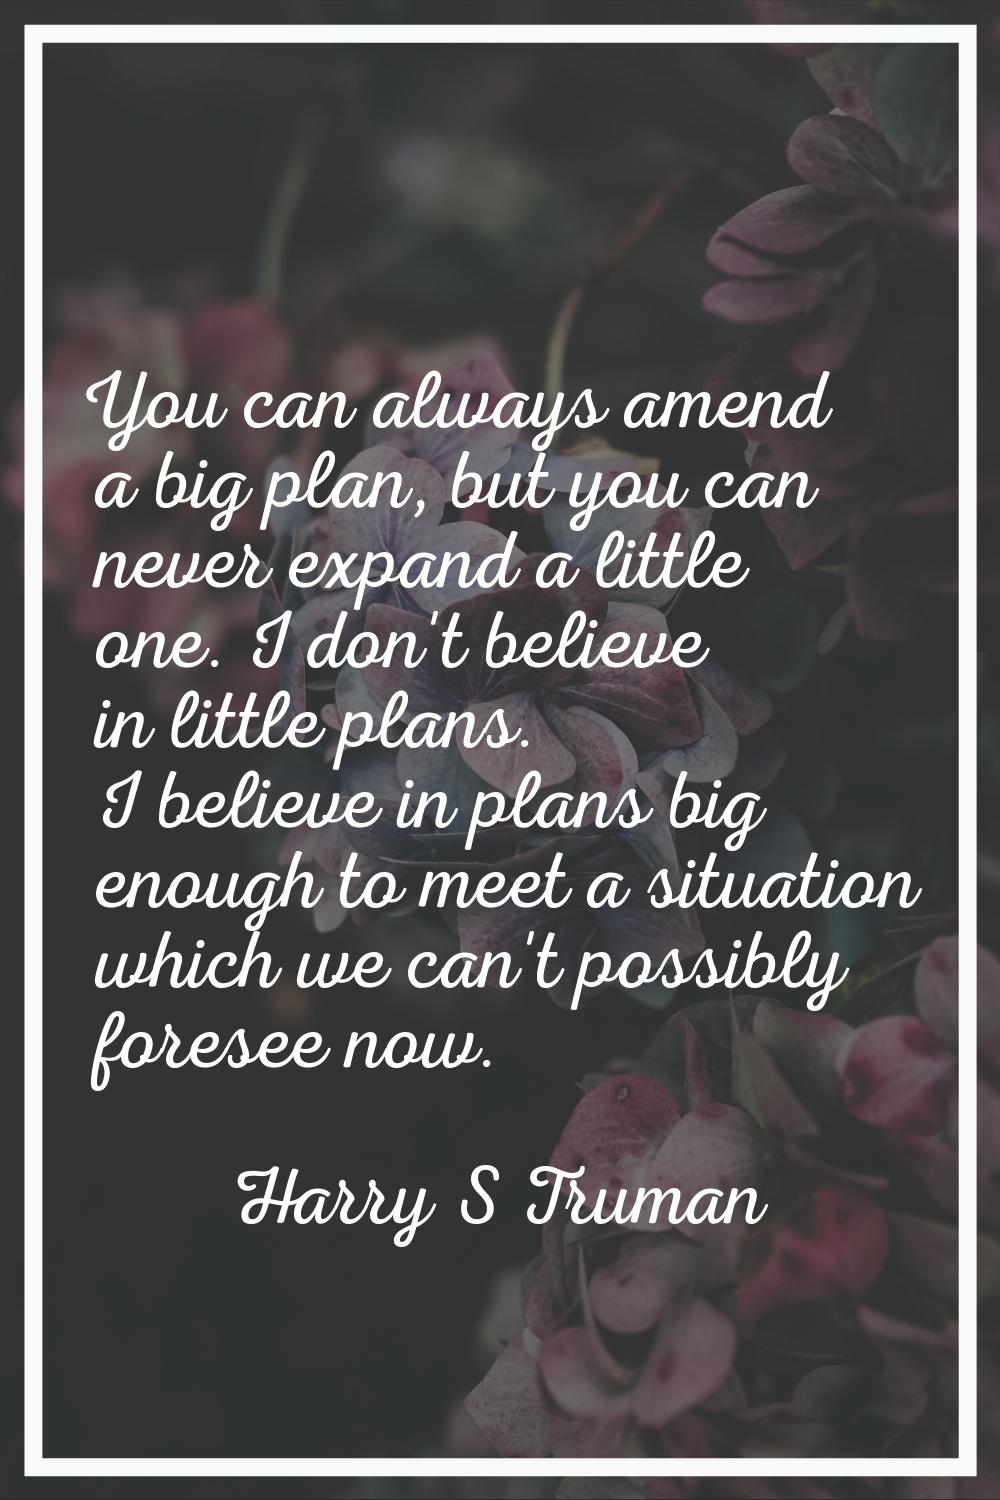 You can always amend a big plan, but you can never expand a little one. I don't believe in little p